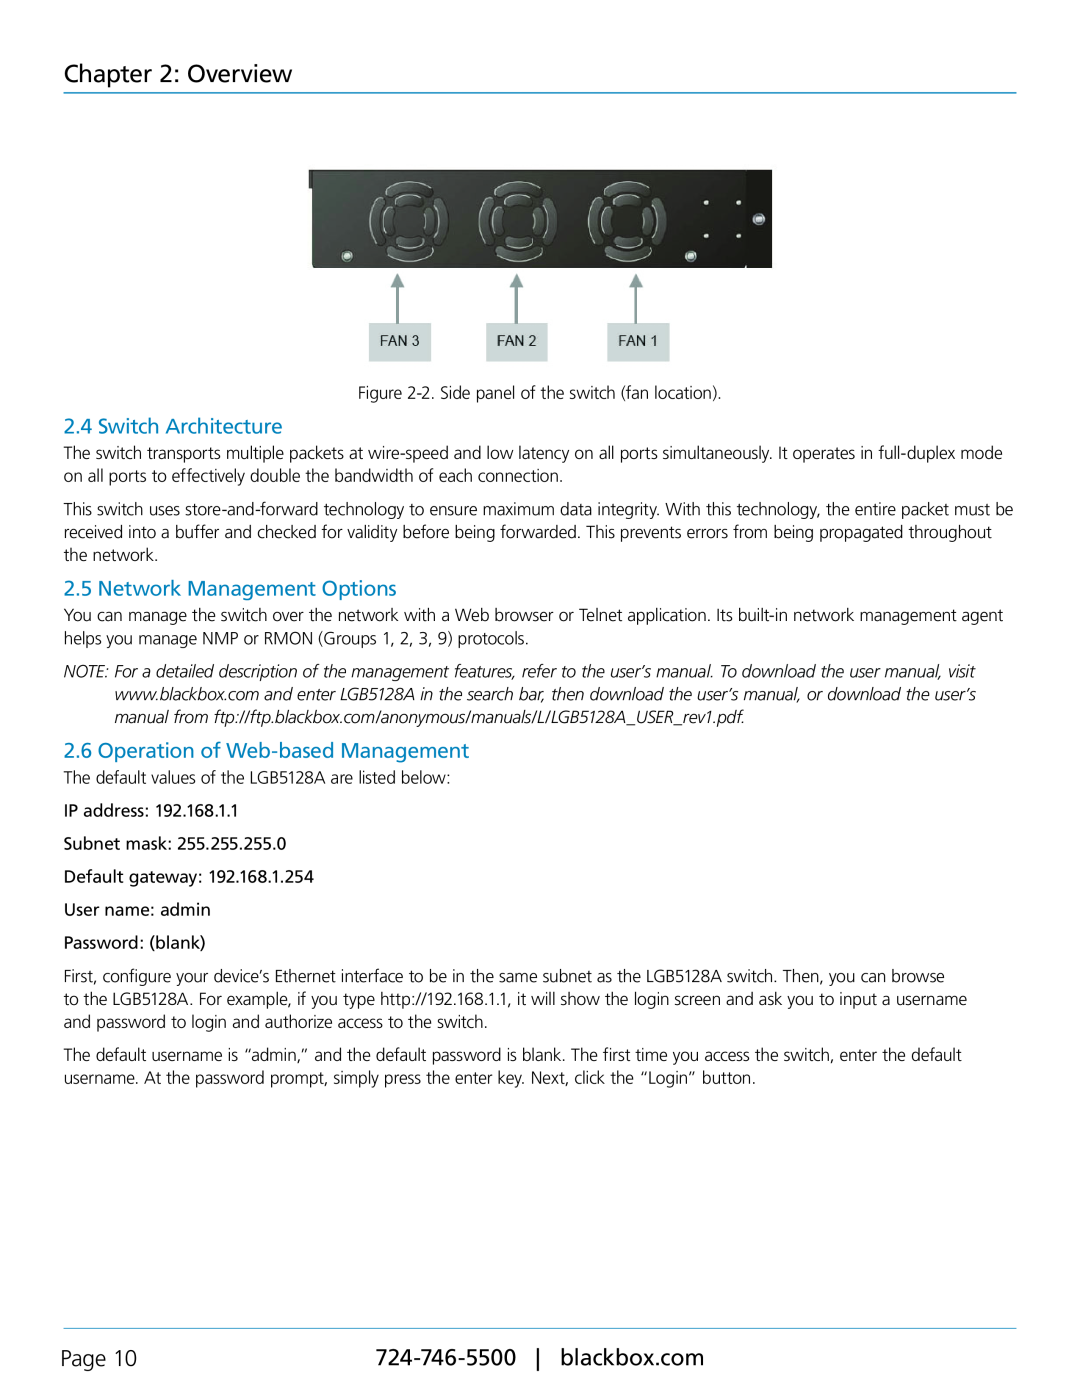 Black Box LGB5128A Switch Architecture, Network Management Options, Operation of Web-basedManagement, Overview, Page 